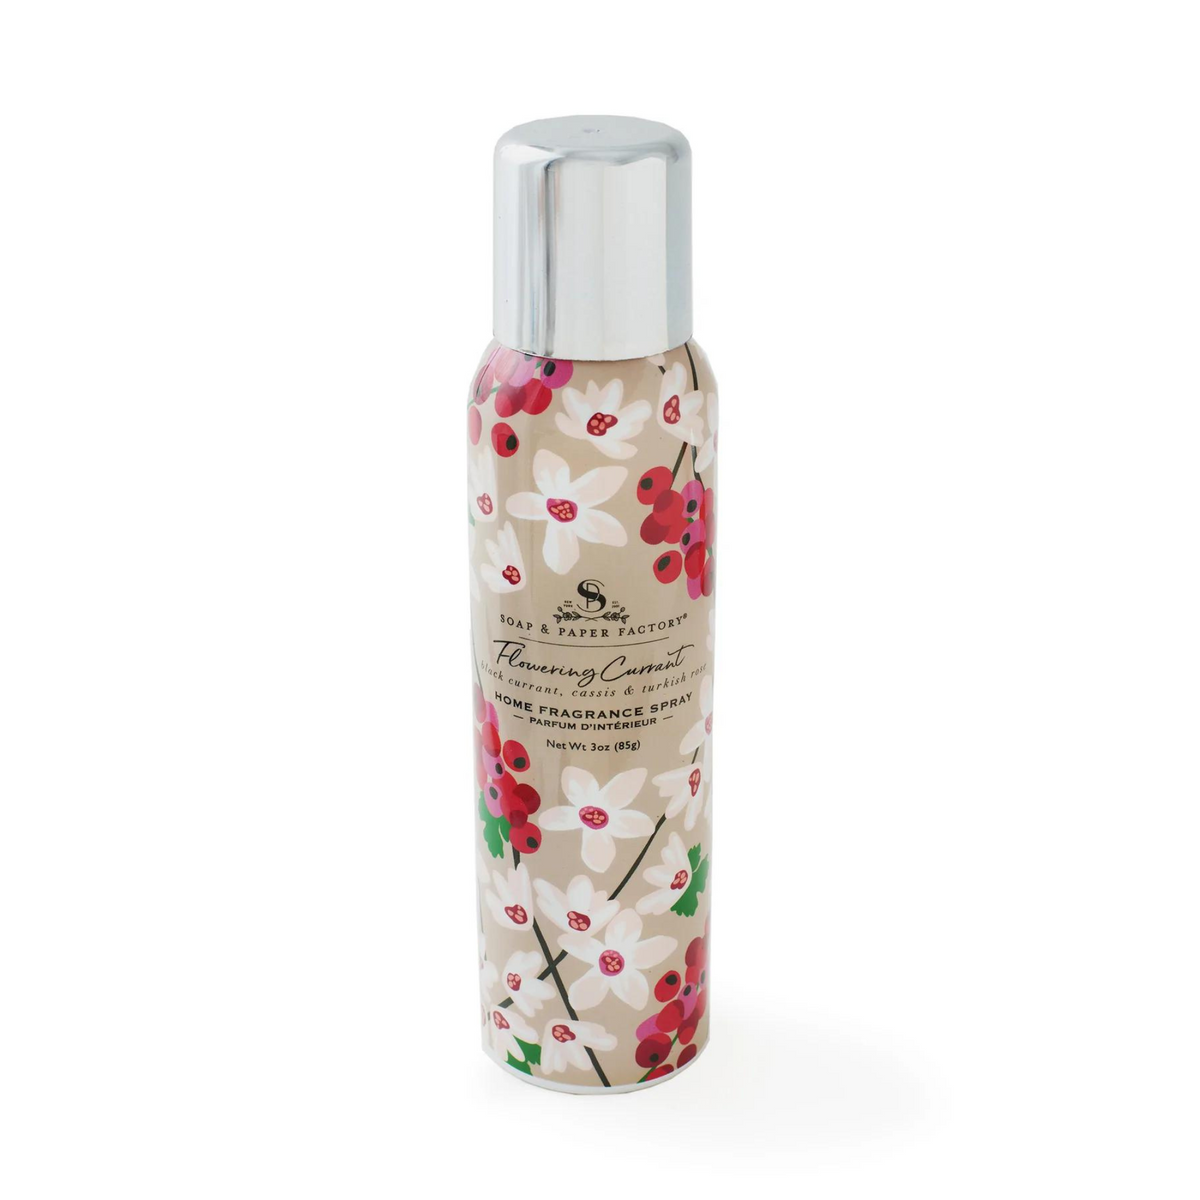 Primary Image of Soap & Paper Factory Flowering Currant Home Fragrance Spray (3 oz)